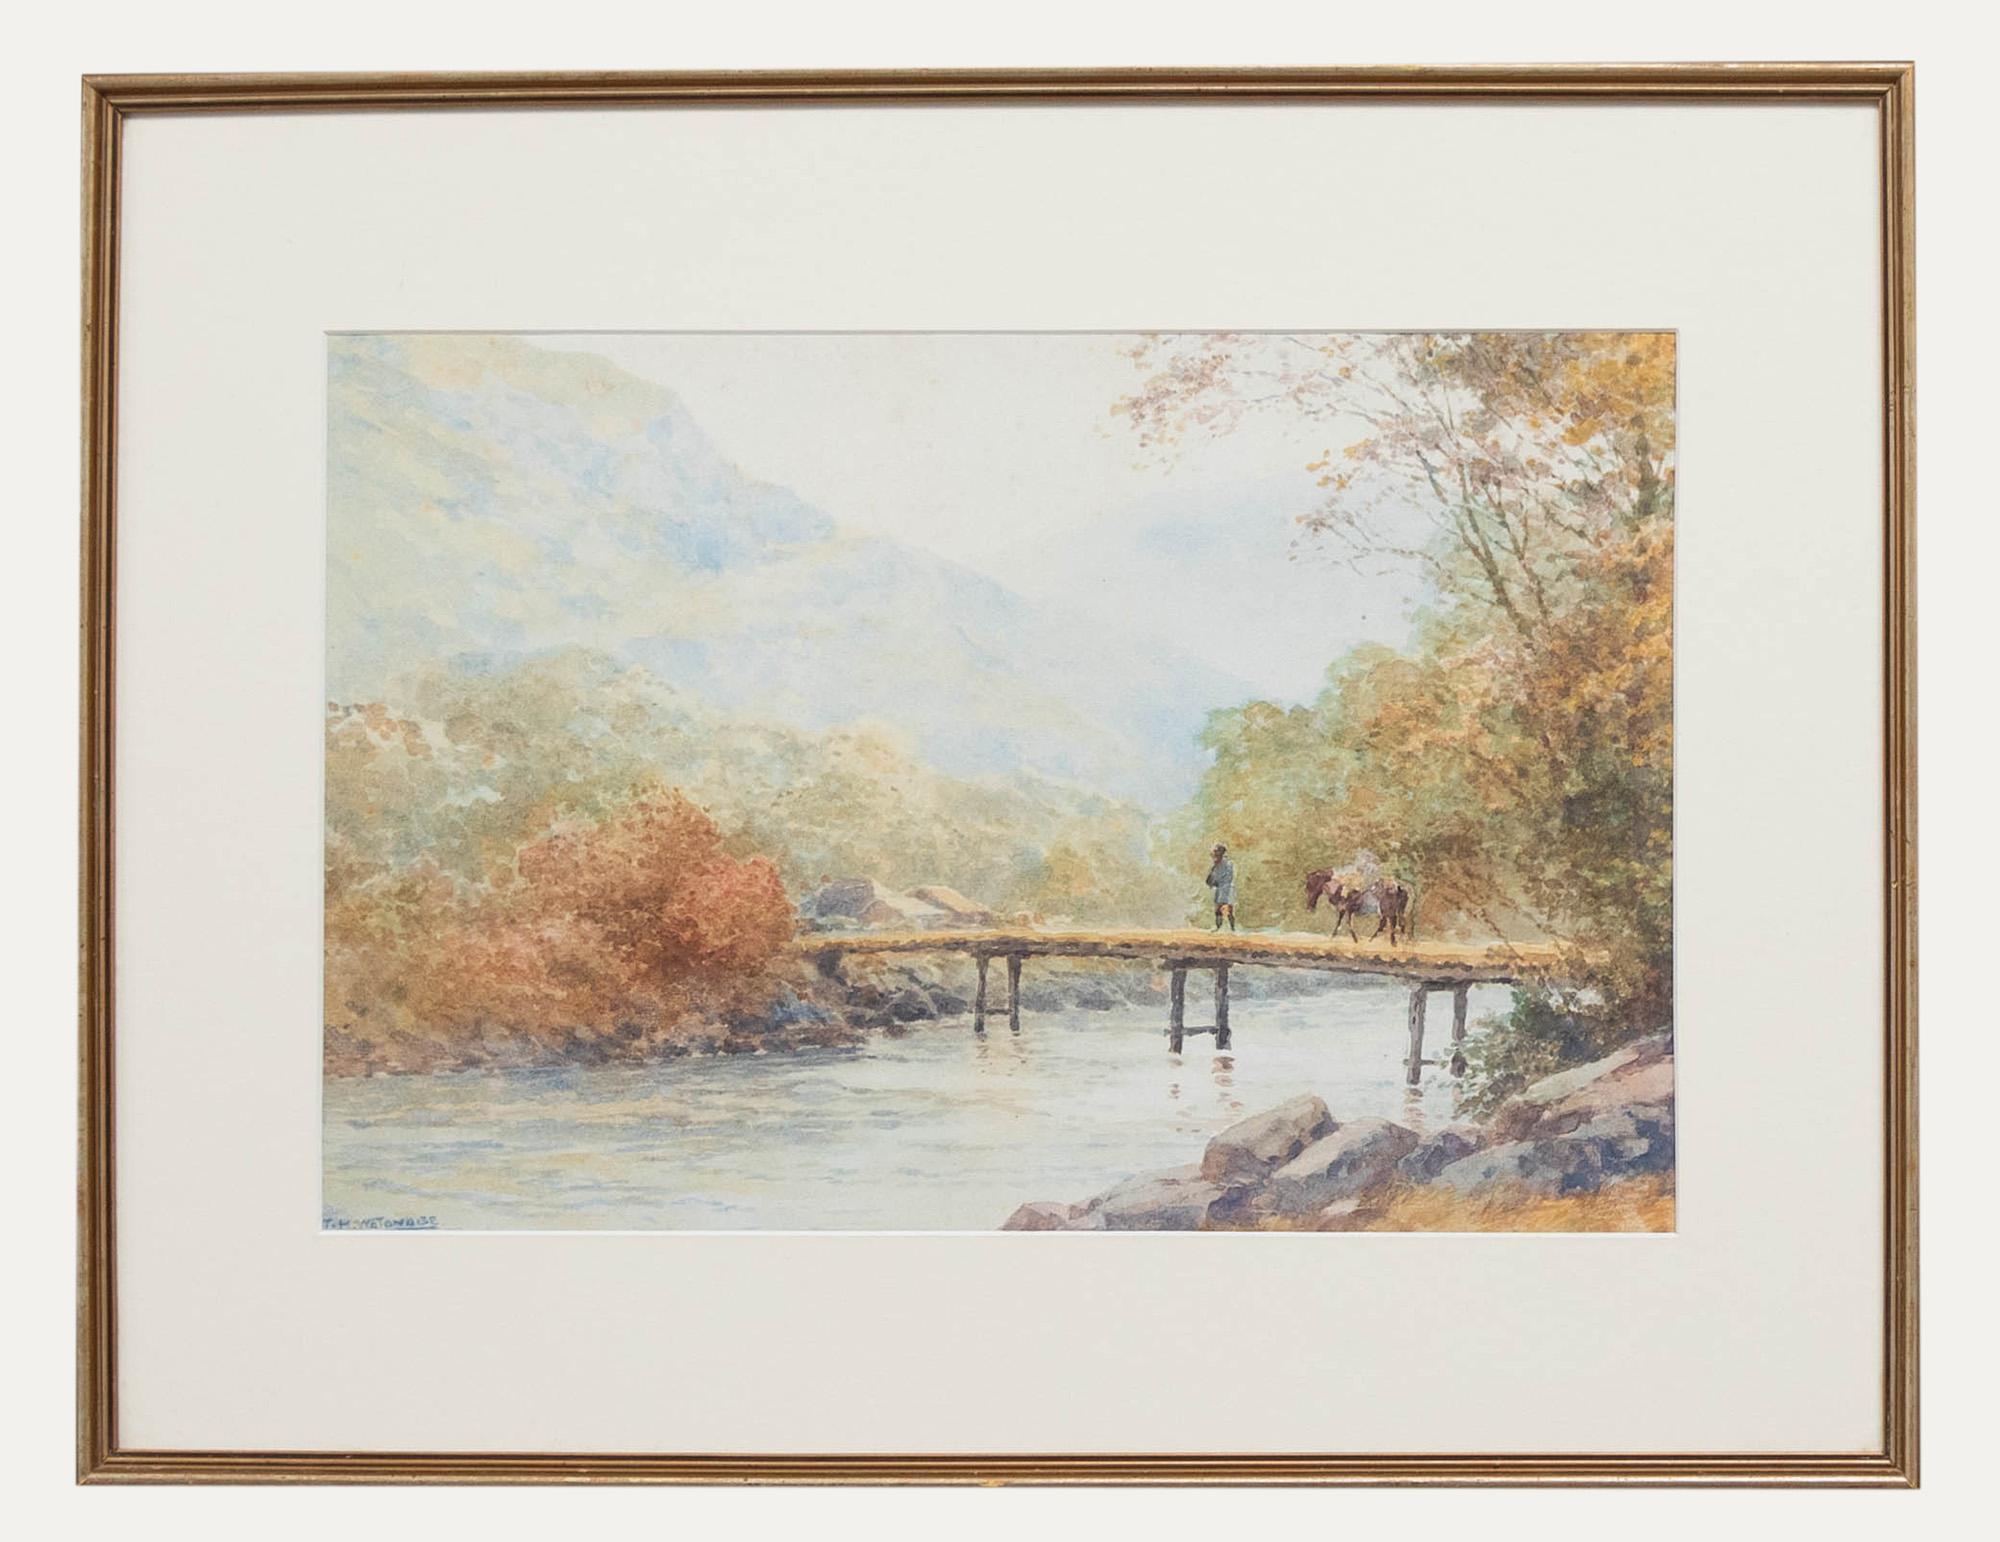 Unknown Landscape Art - T. H. Watanabe - Early 20th Century Watercolour, River Crossing Near Chucheng